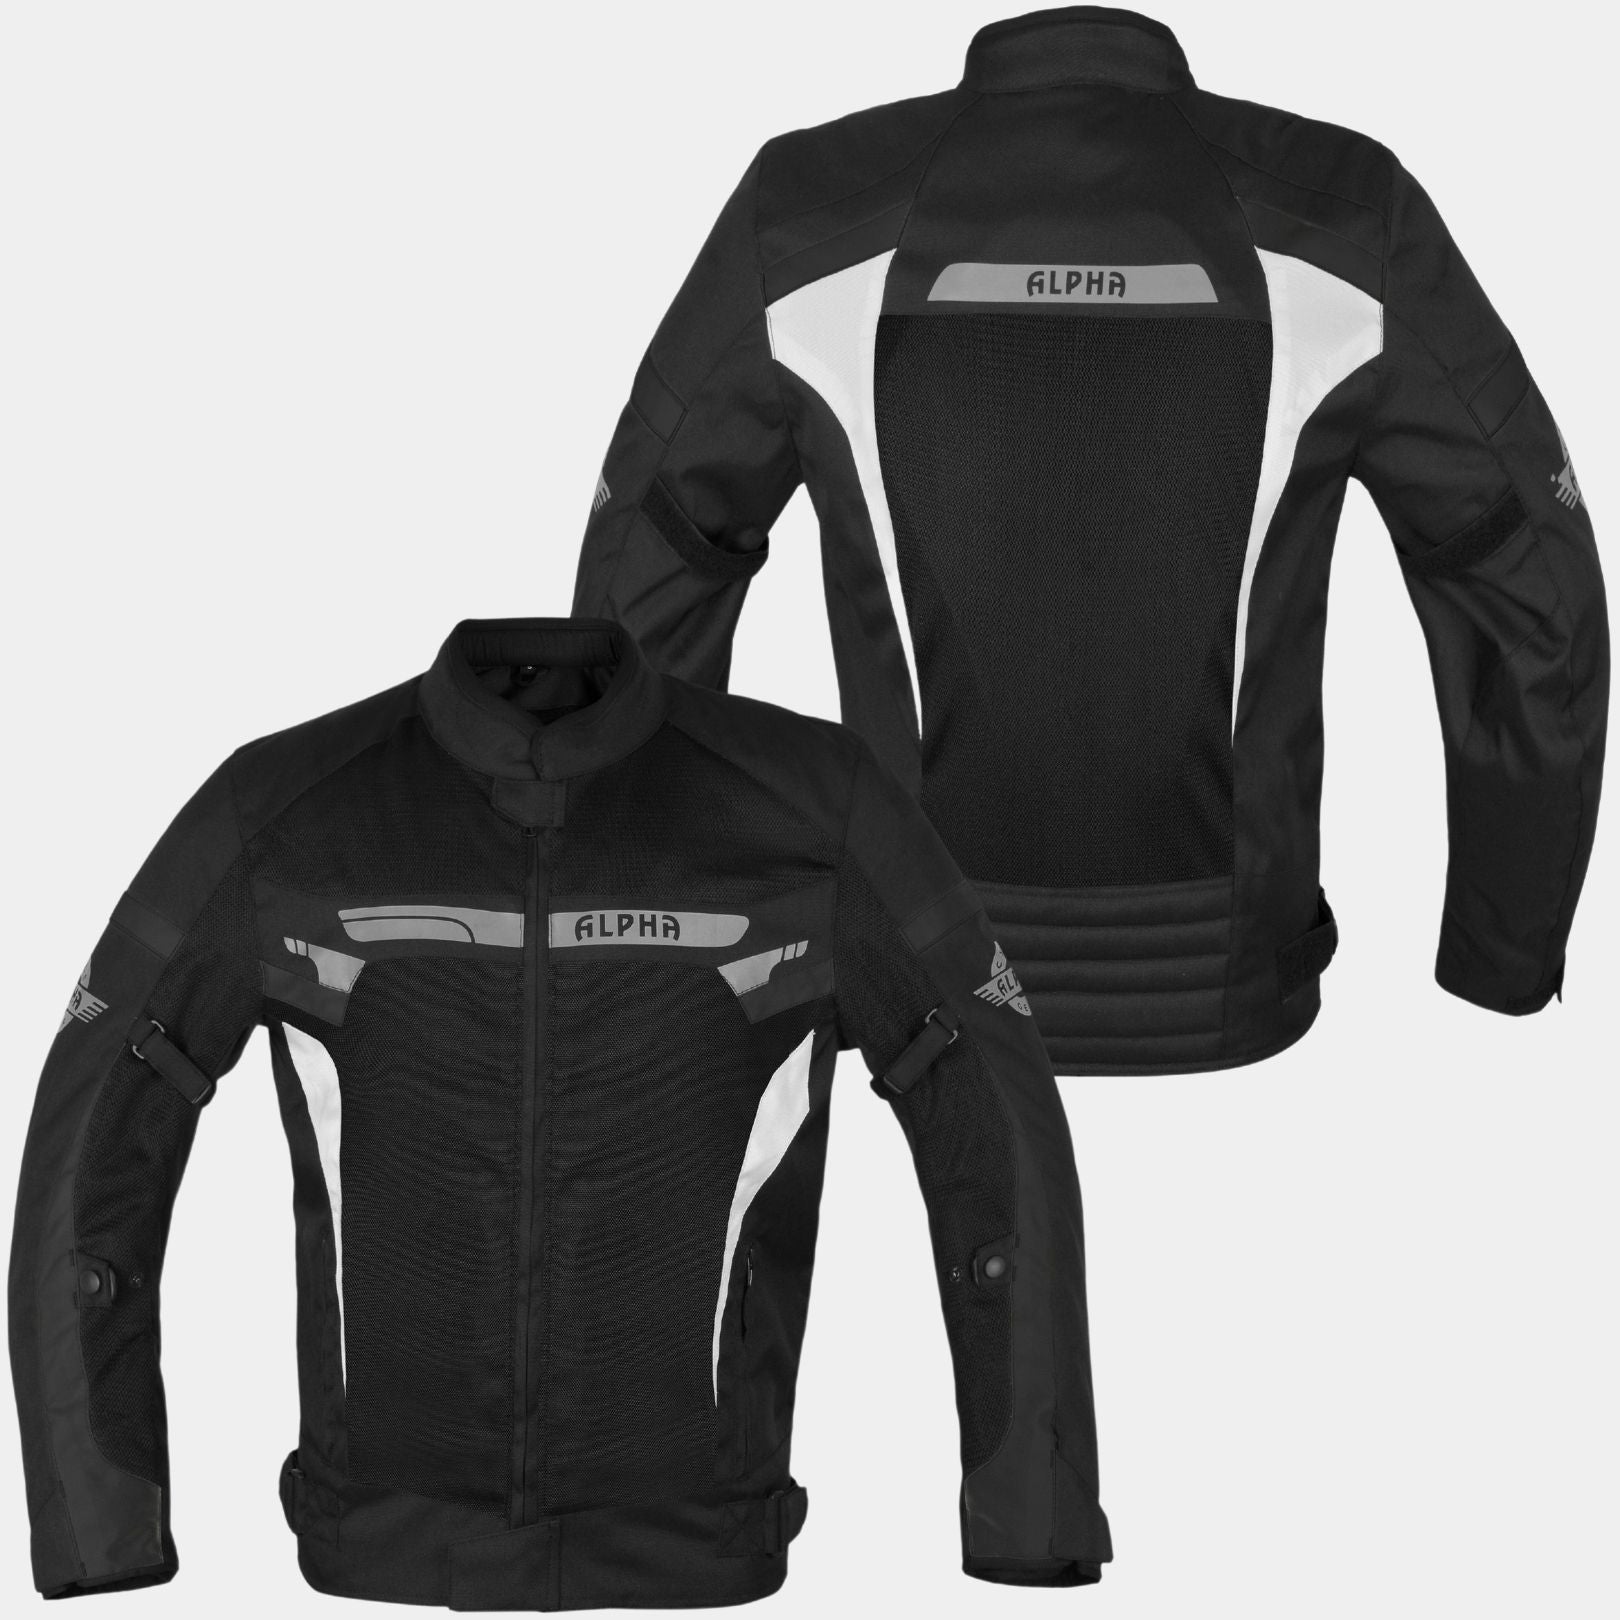 Tornado - ALPHA CYCLE GEAR BREATHABLE BIKERS RIDING PROTECTION MOTORCY –  Alpha Cycle Gear